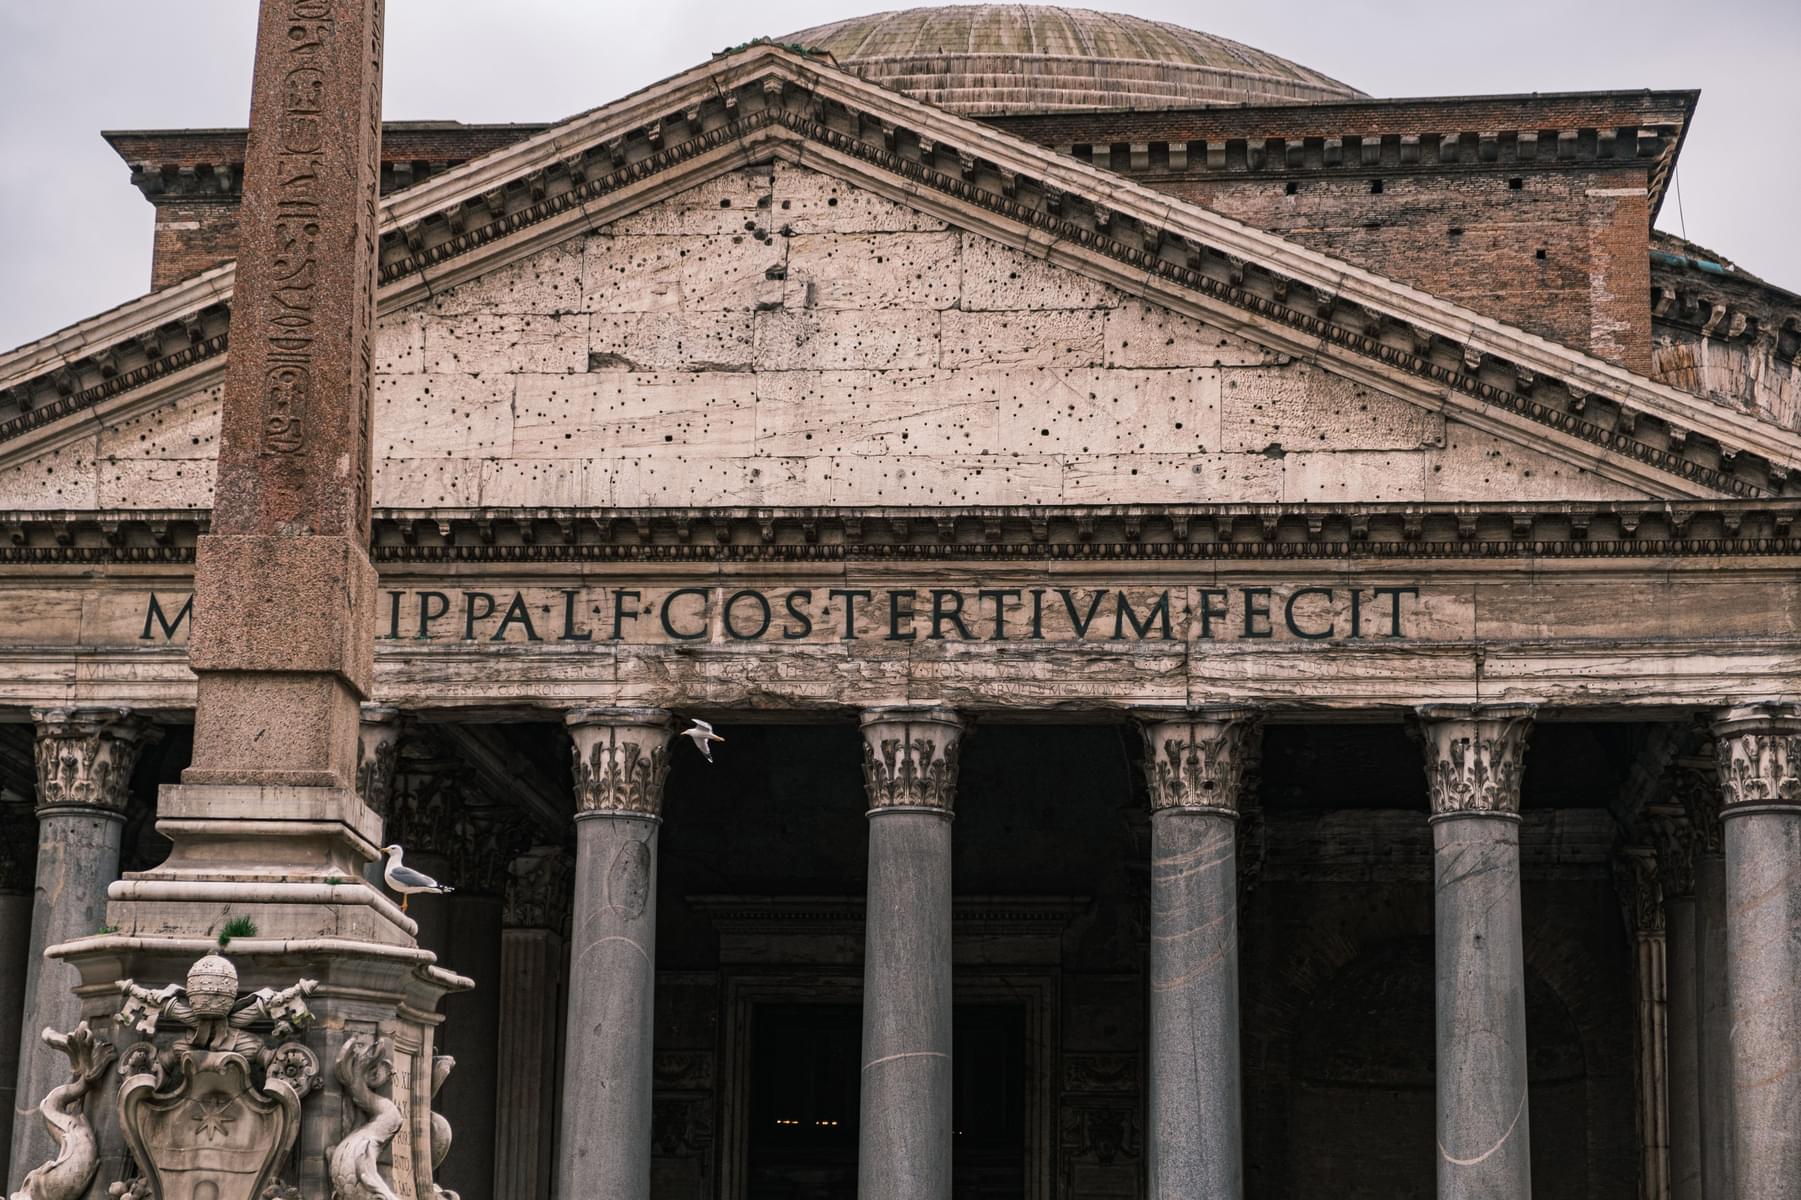 Facts about the Pantheon